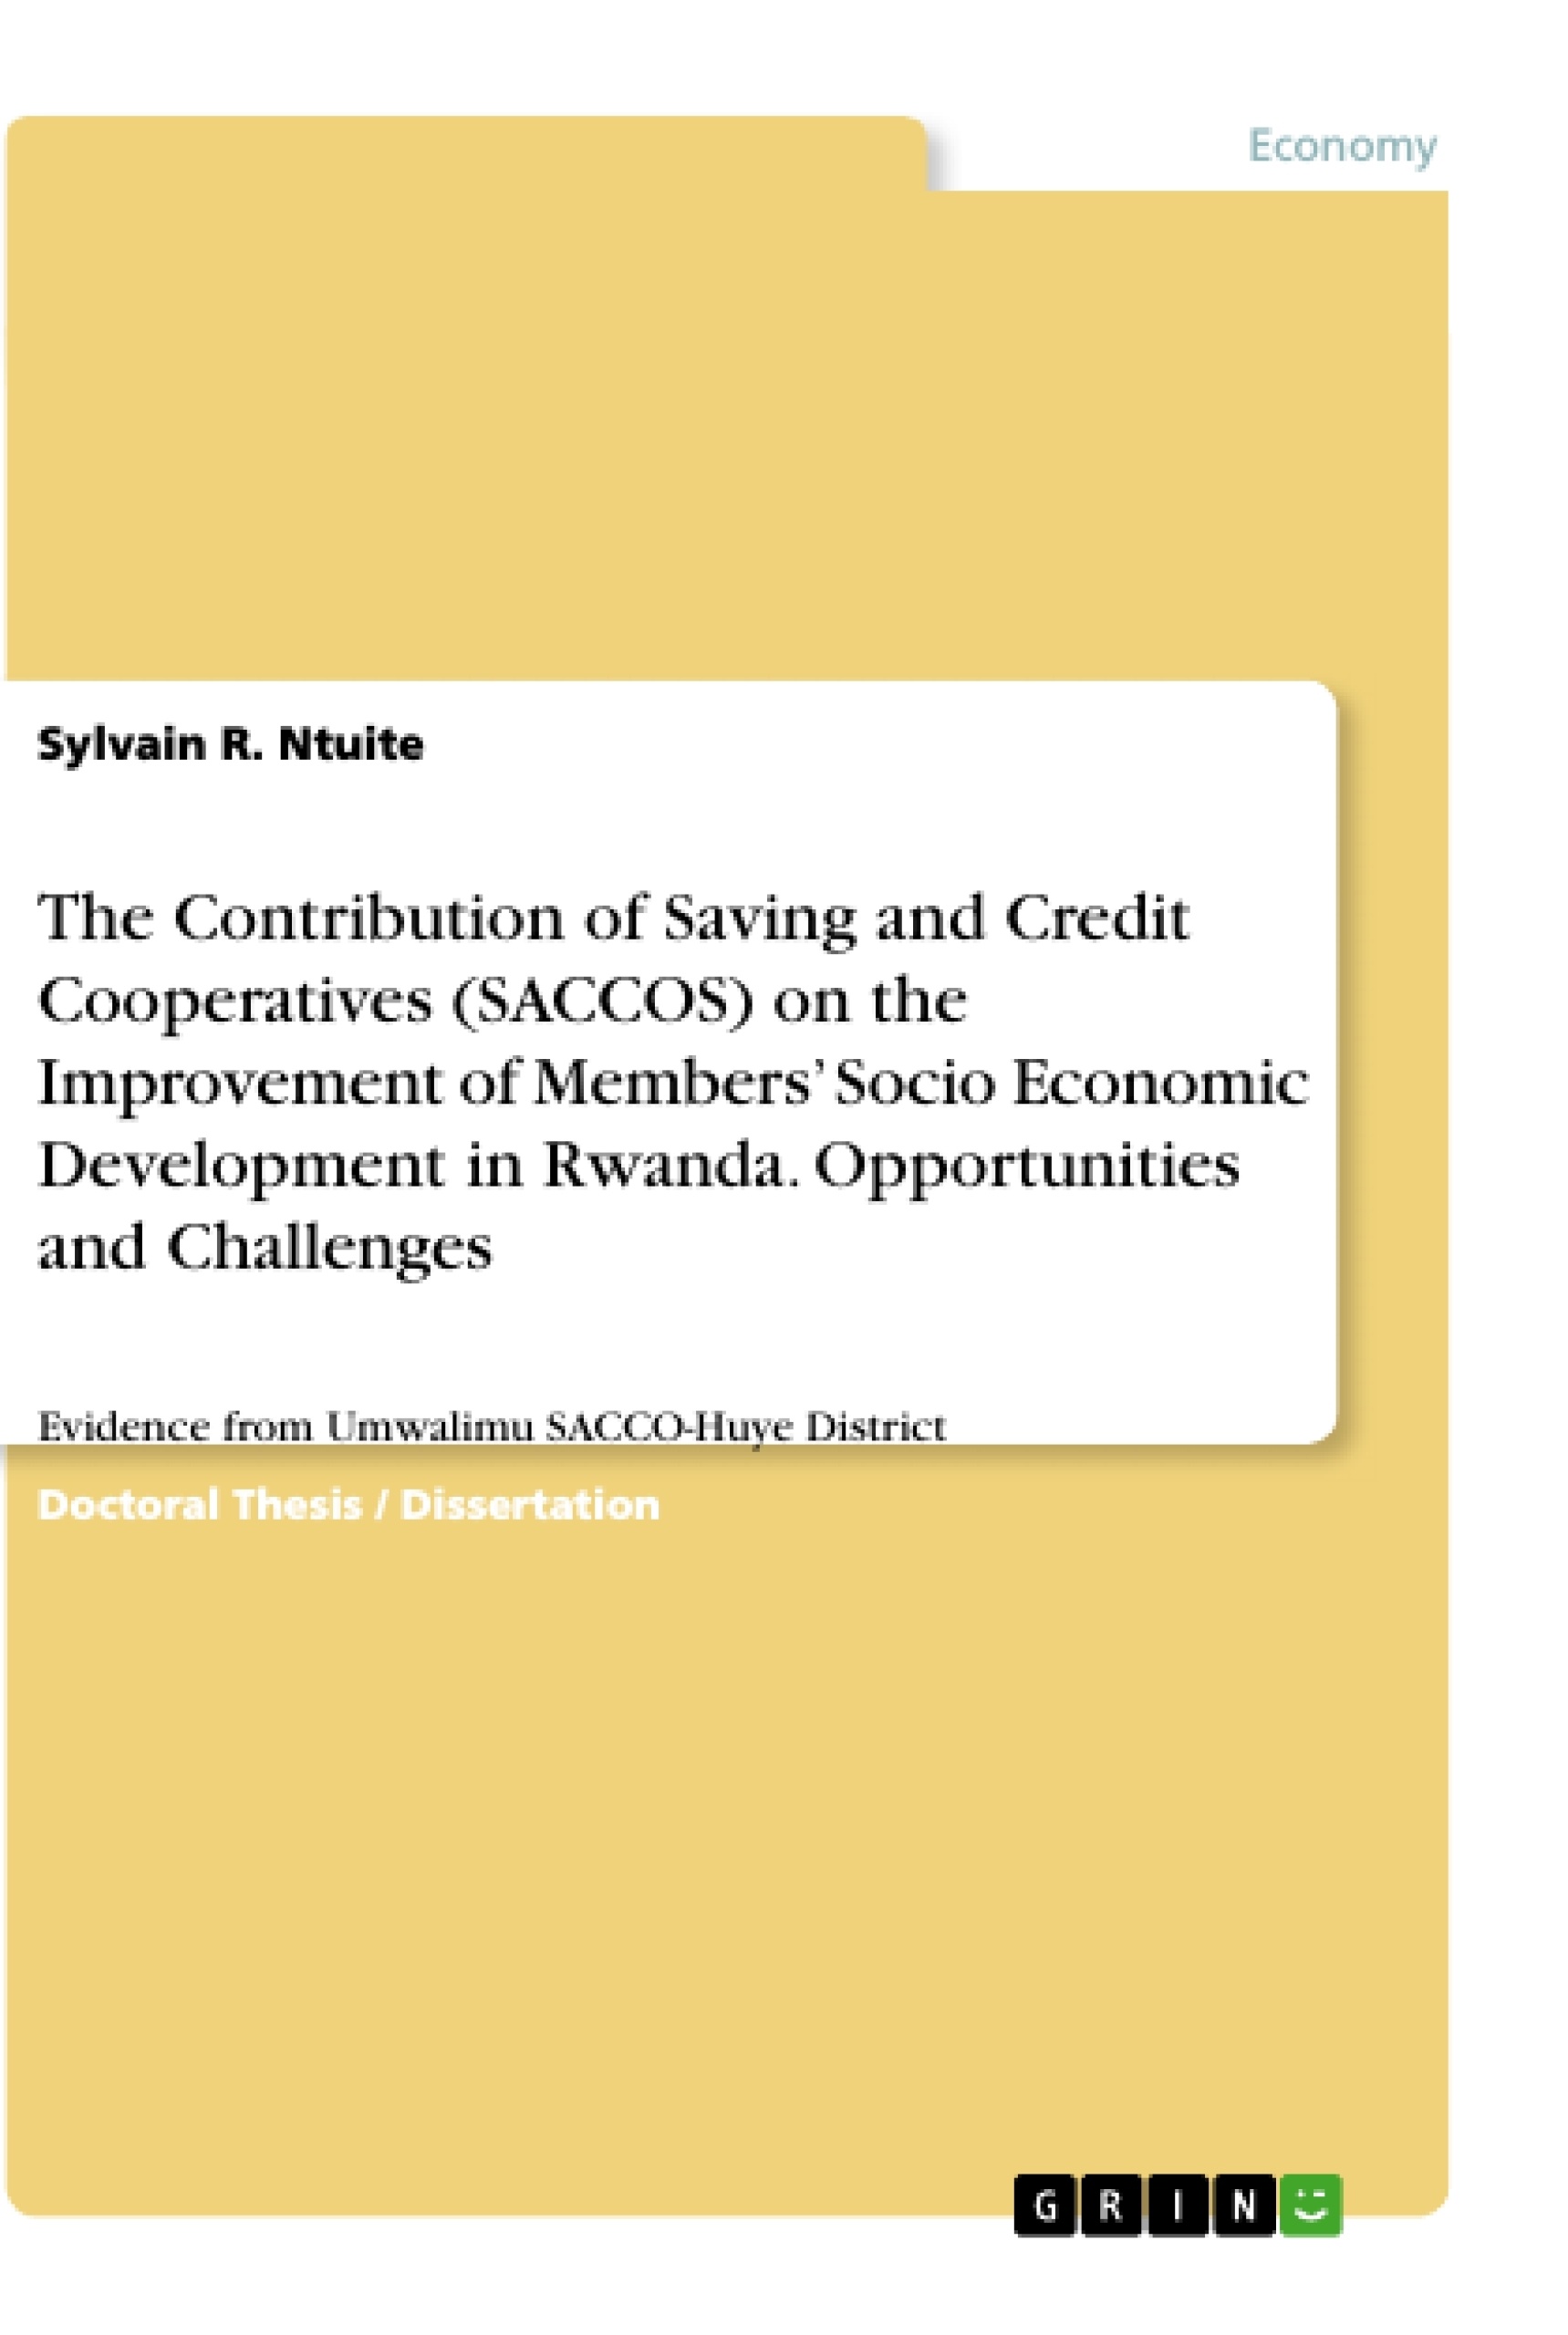 Titel: The Contribution of Saving and Credit Cooperatives (SACCOS) on the Improvement of Members’ Socio Economic Development in Rwanda. Opportunities and Challenges